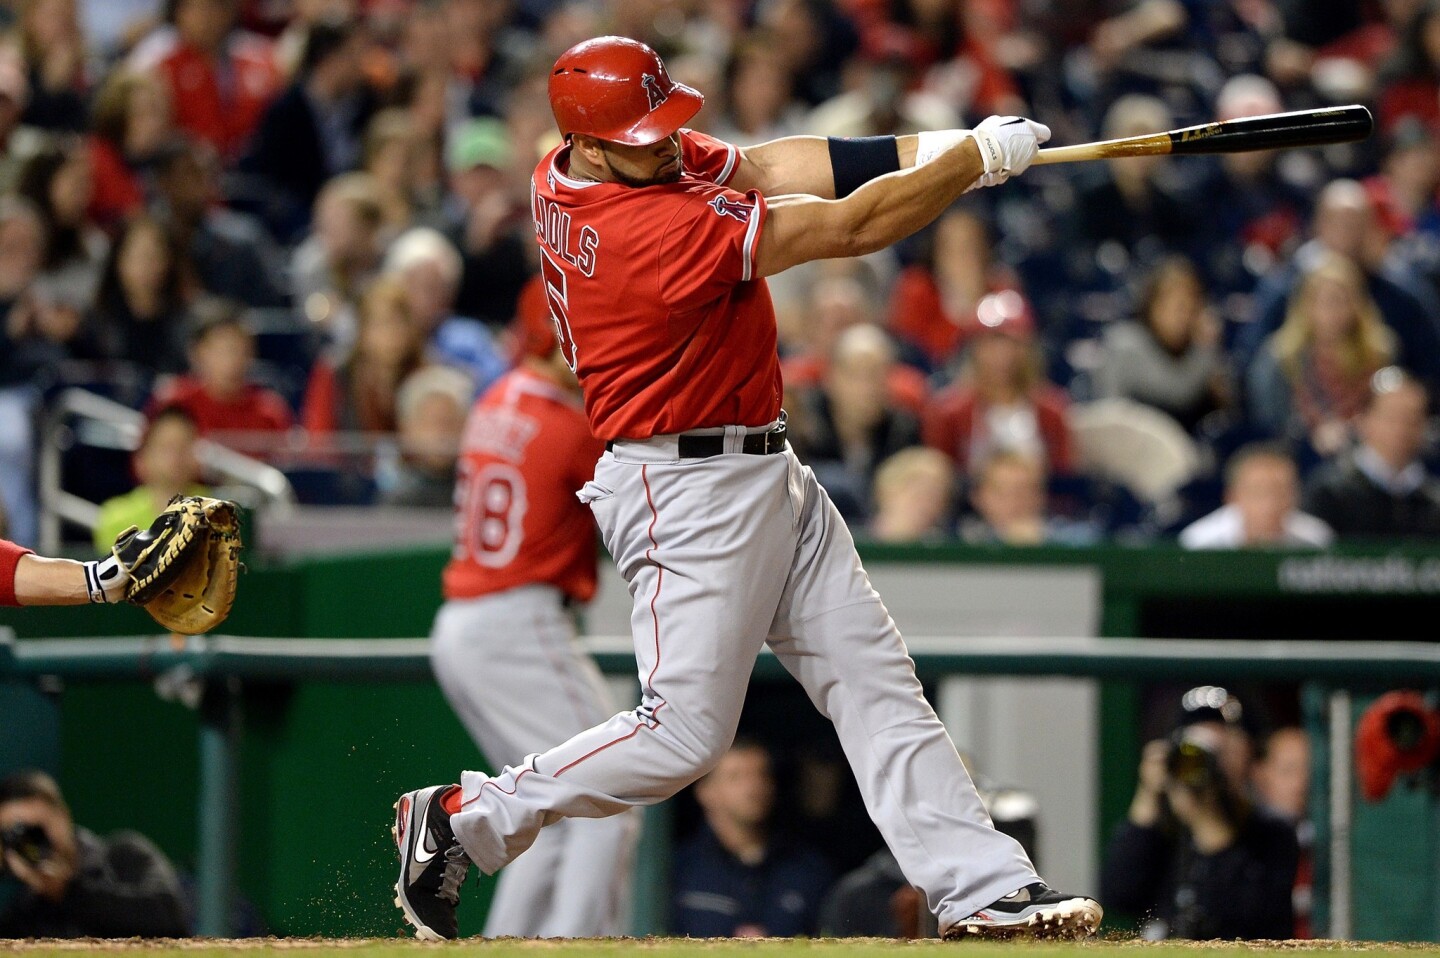 Angels first baseman Albert Pujols hits his 500th career home run -- a two-run blast -- during the fifth inning of Tuesday's game against the Washington Nationals.